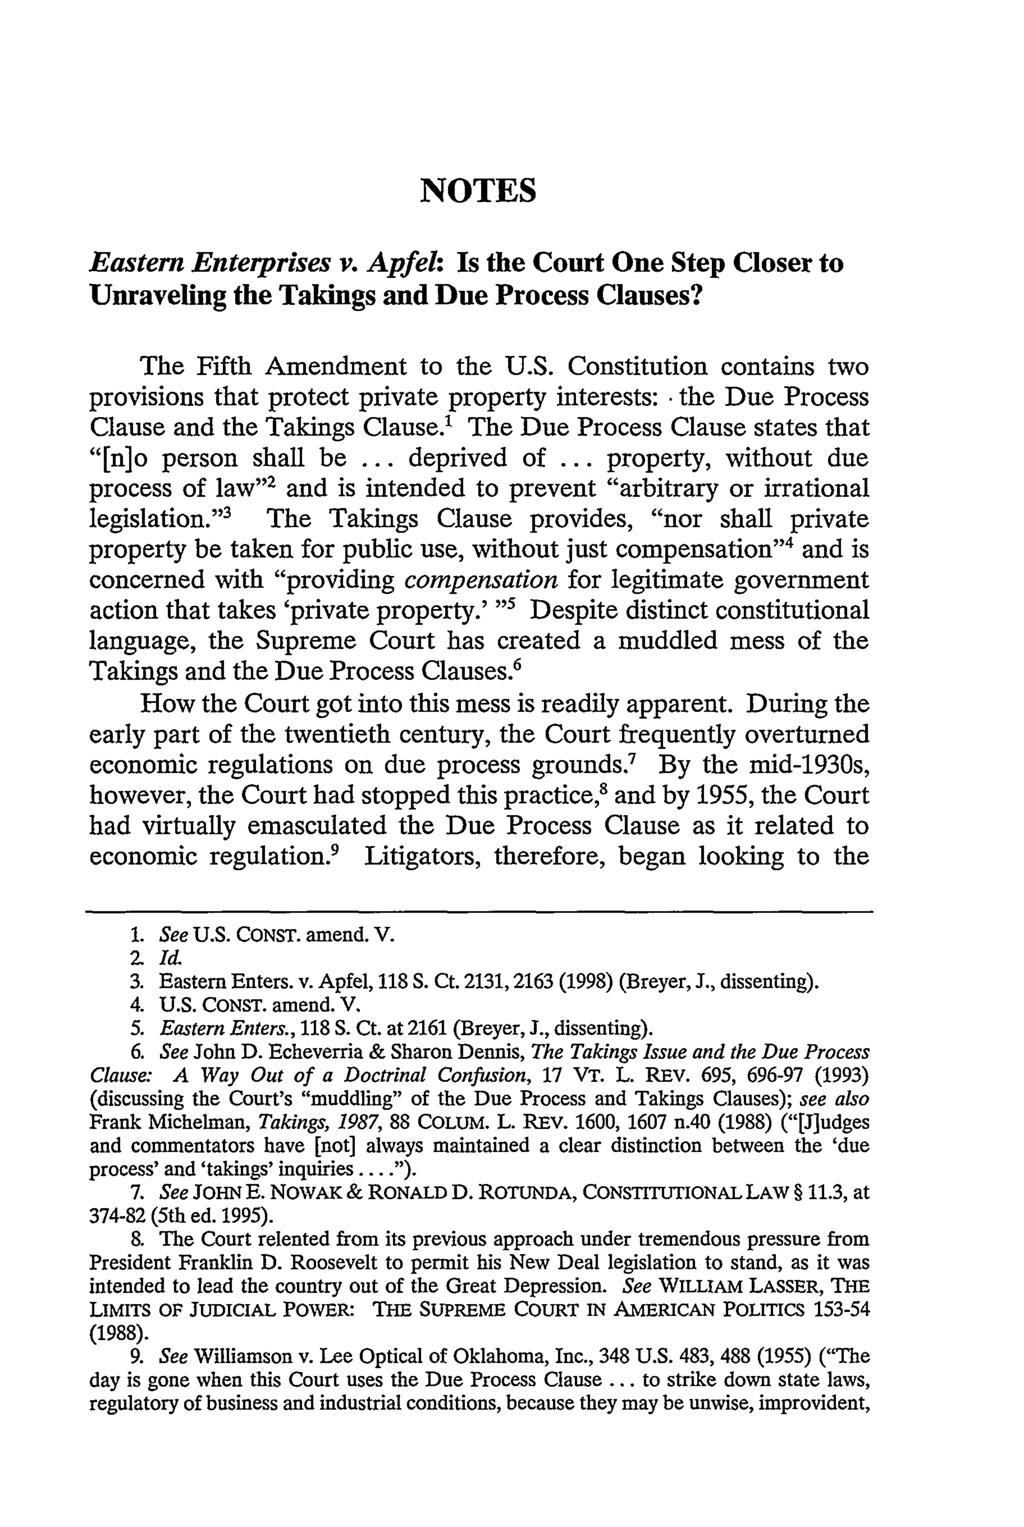 NOTES Eastern Enterprises v. Apfel: Is the Court One Step Closer to Unraveling the Takings and Due Process Clauses? The Fifth Amendment to the U.S. Constitution contains two provisions that protect private property interests: the Due Process Clause and the Takings Clause.